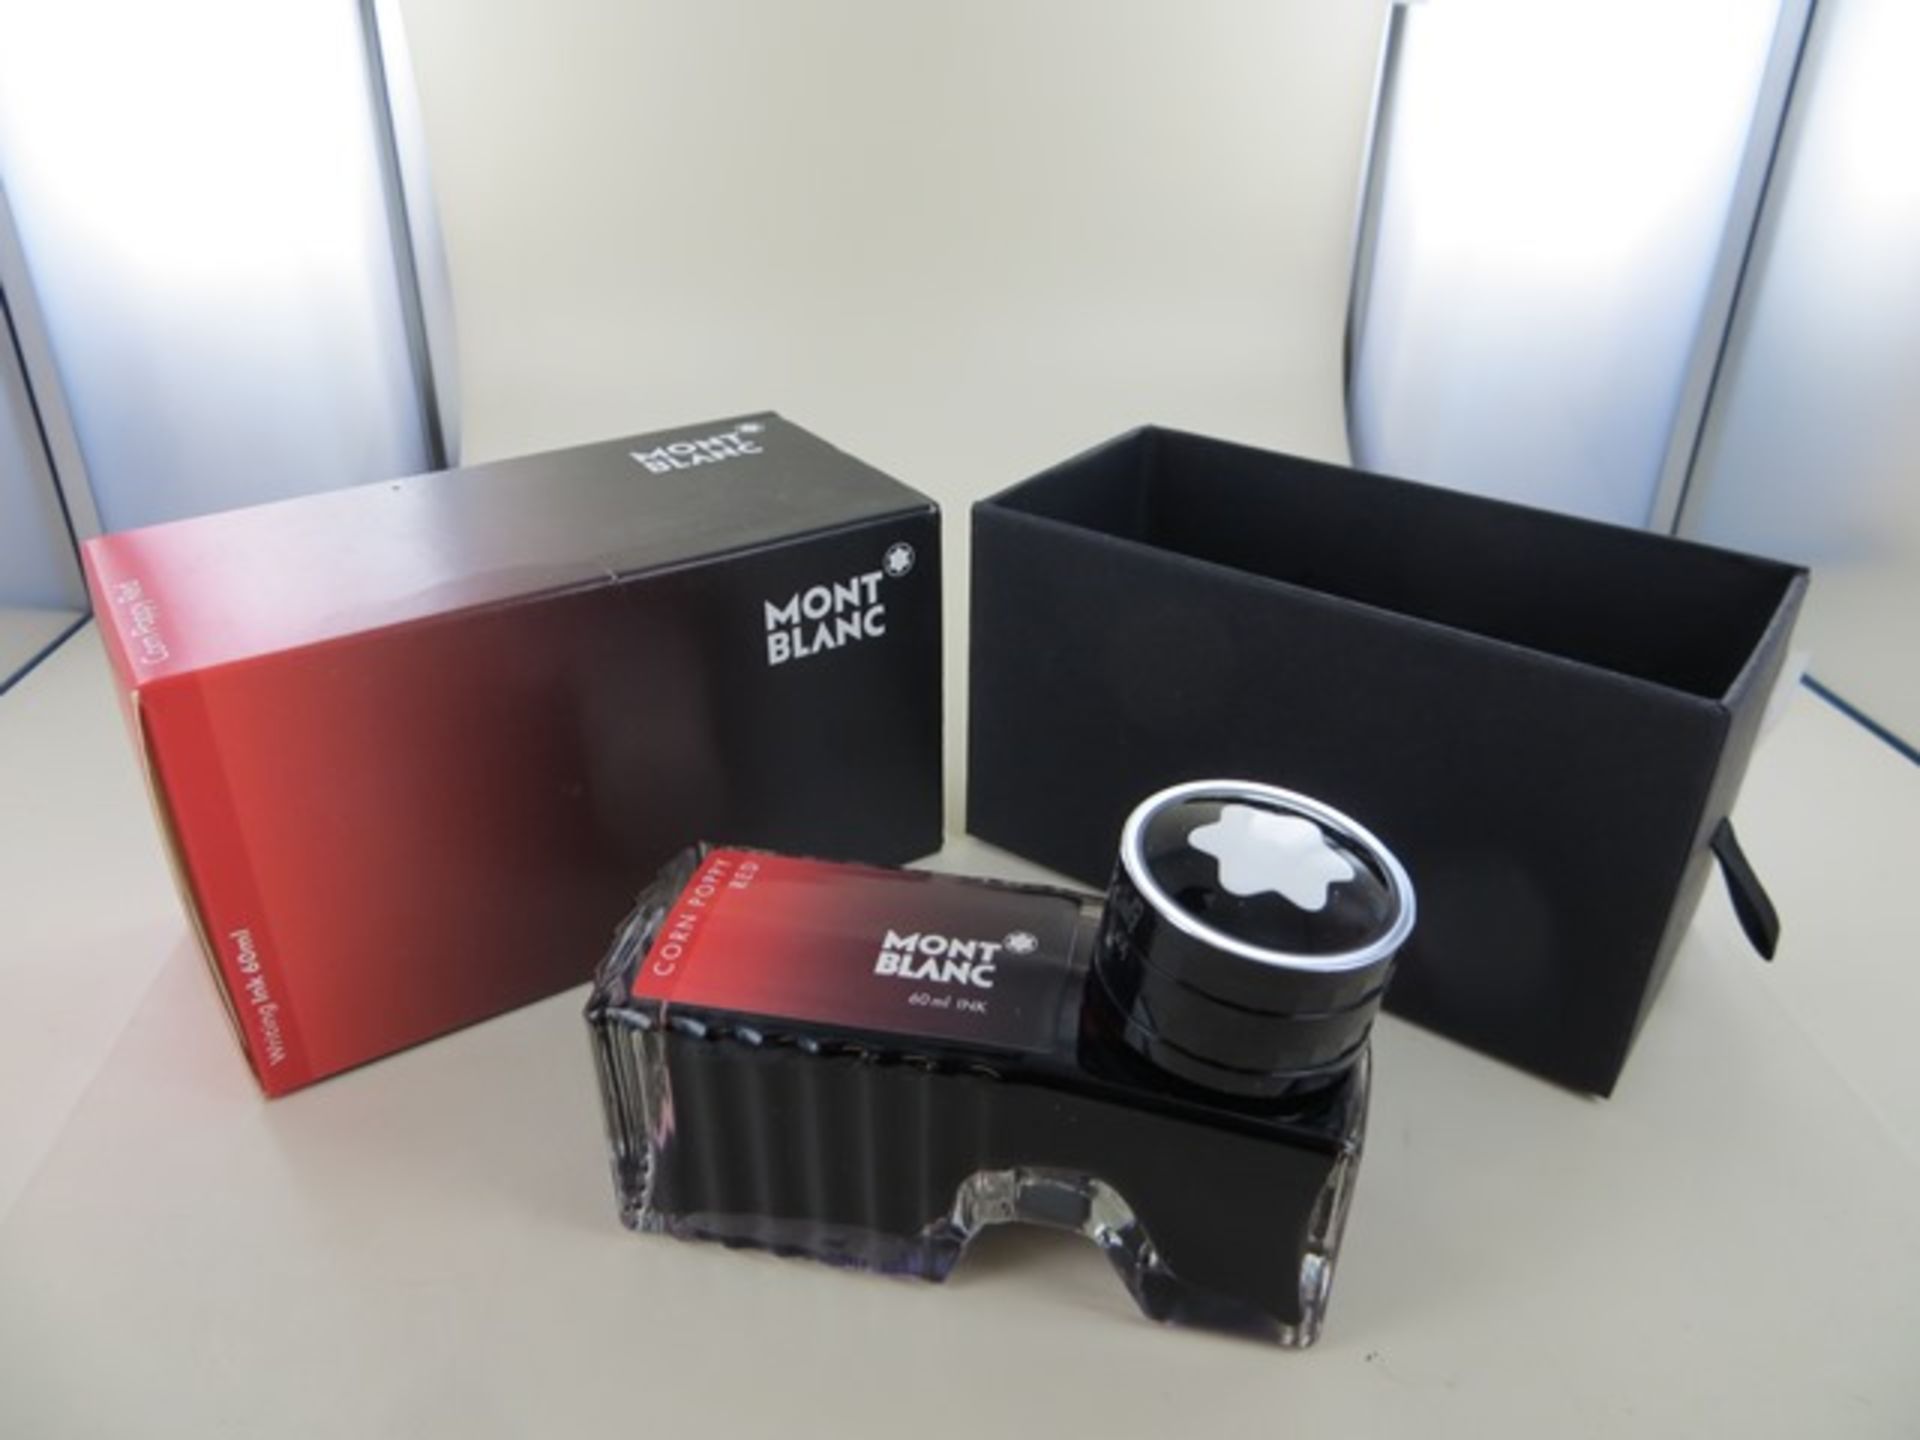 Two Montblanc Ink Bottles Corn Poppy Red 60ml Art No 1141432 RRP £16 each. Please note: This lot